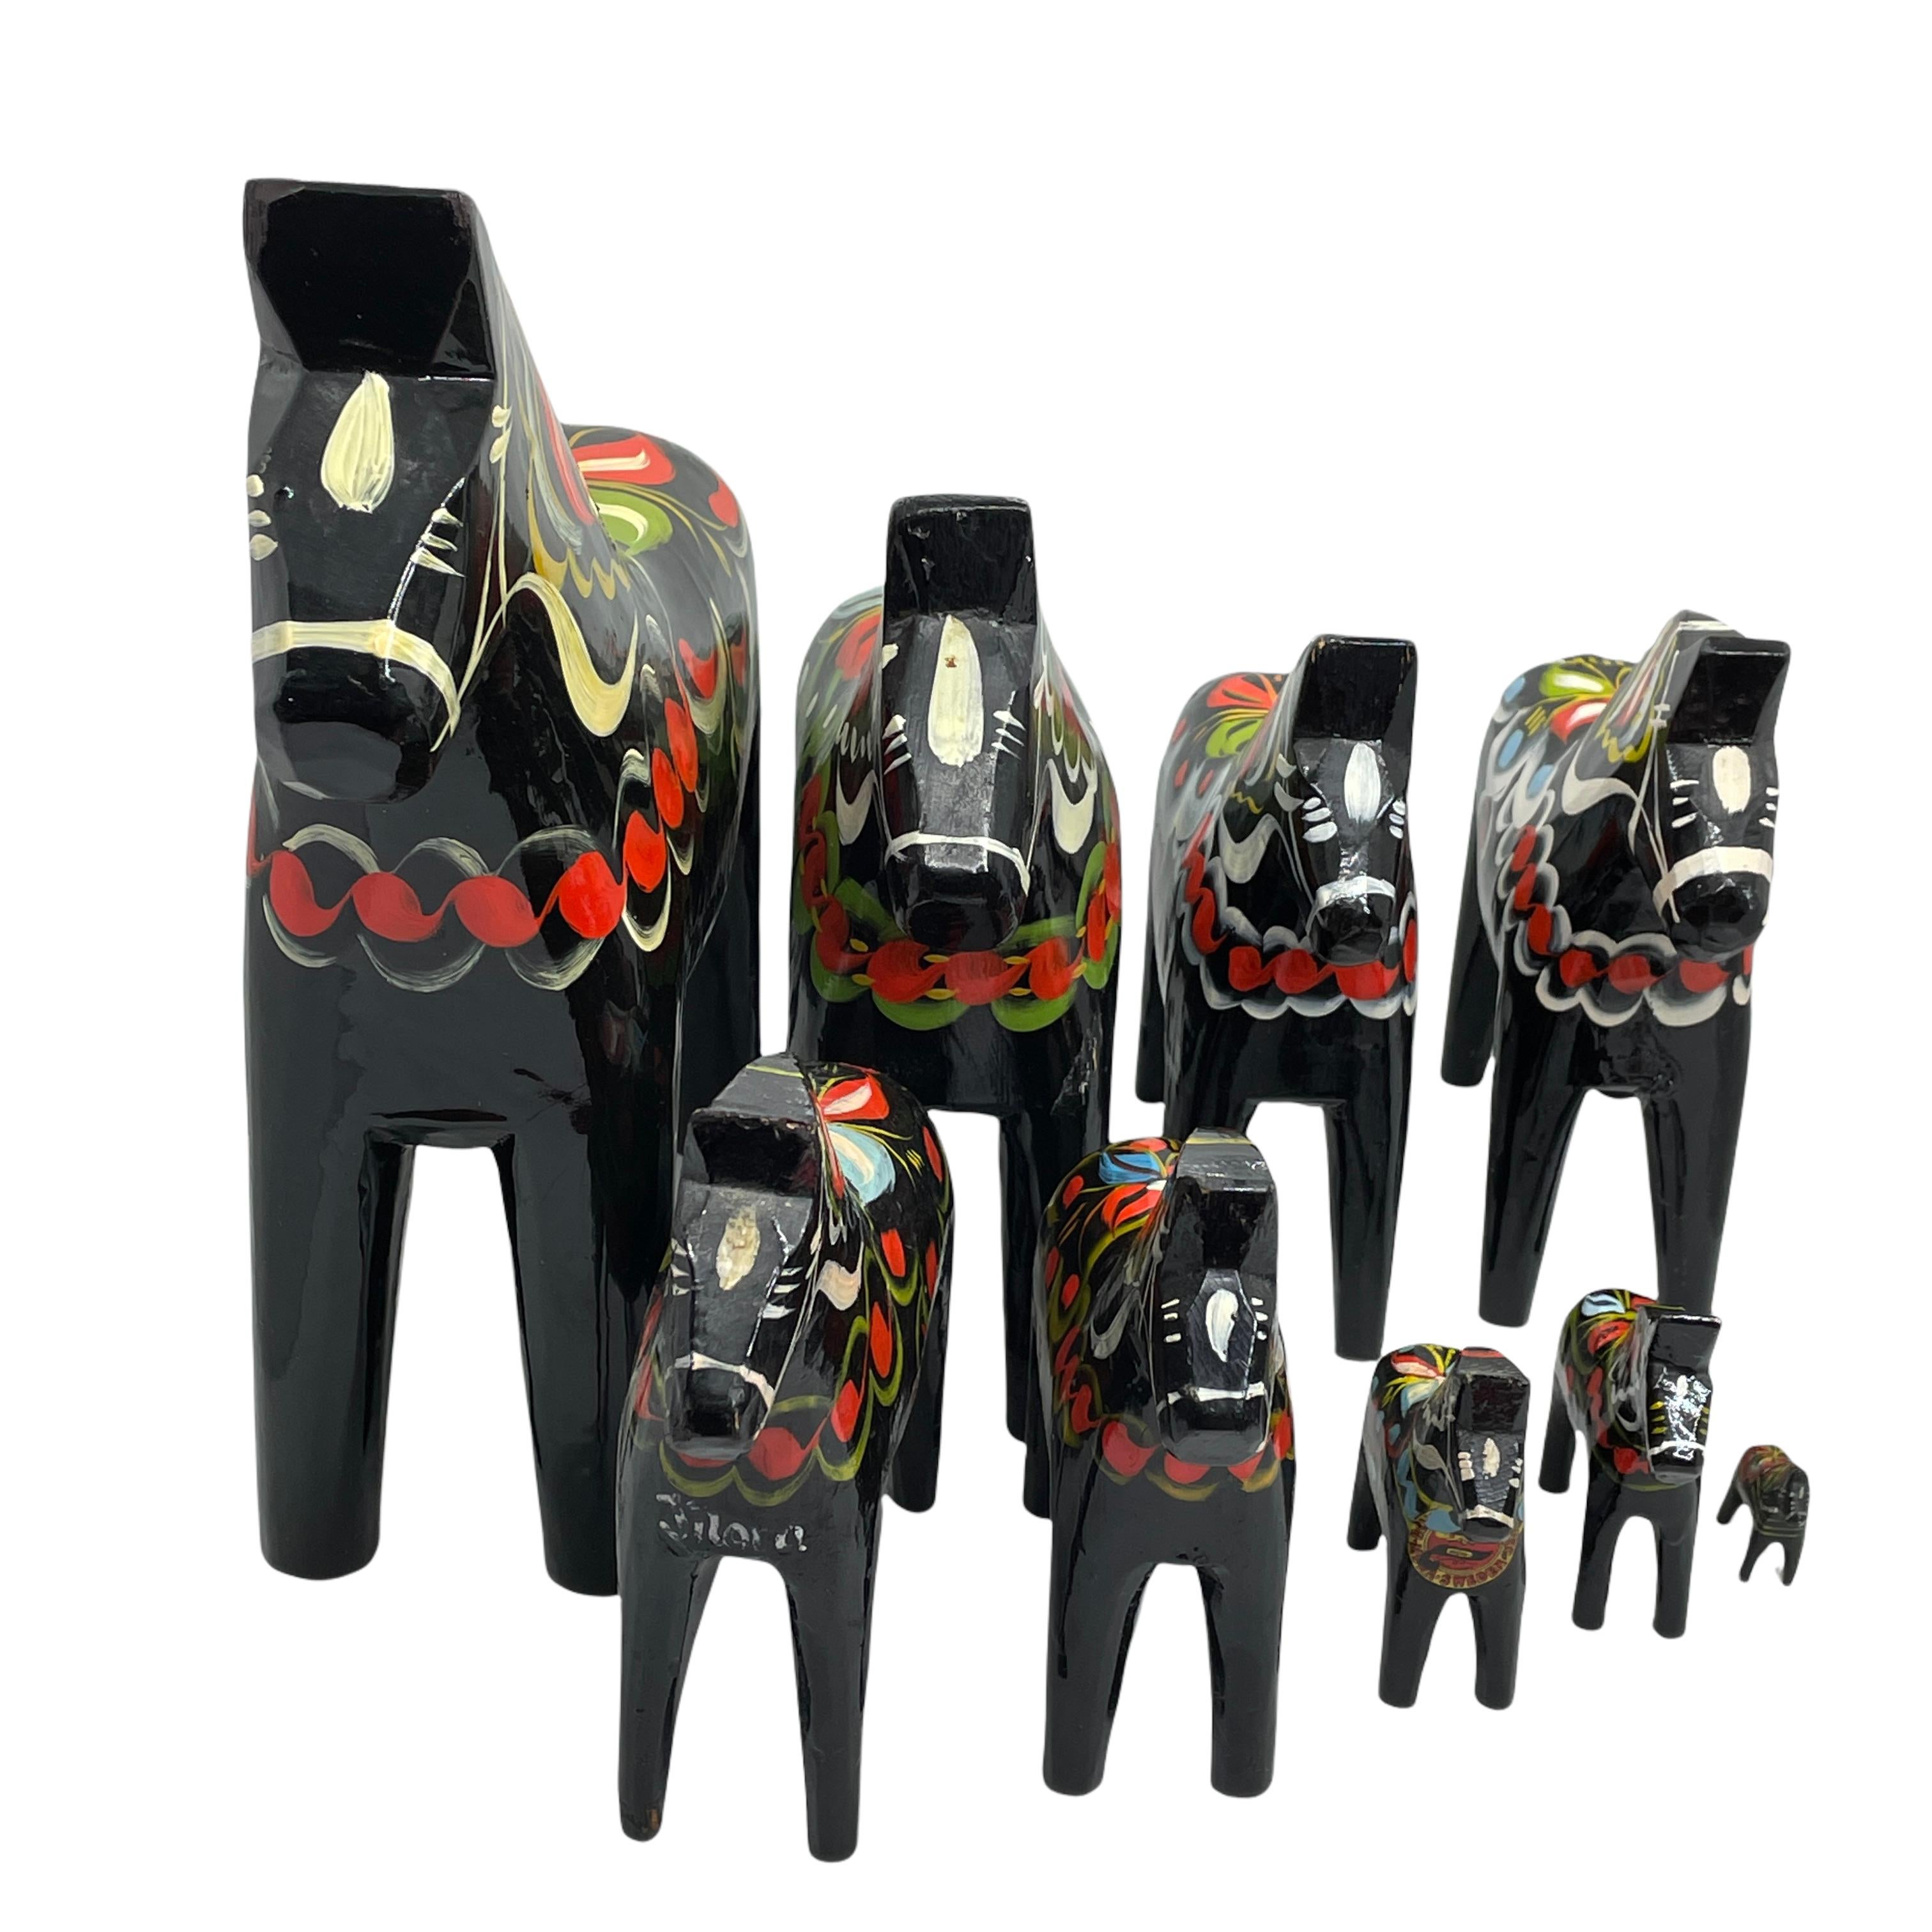 This offer is for a collection of nine Swedish Dala Horses by Nils Olsson. These are hand carved painted wood. The largest one is approximate 10 1/2